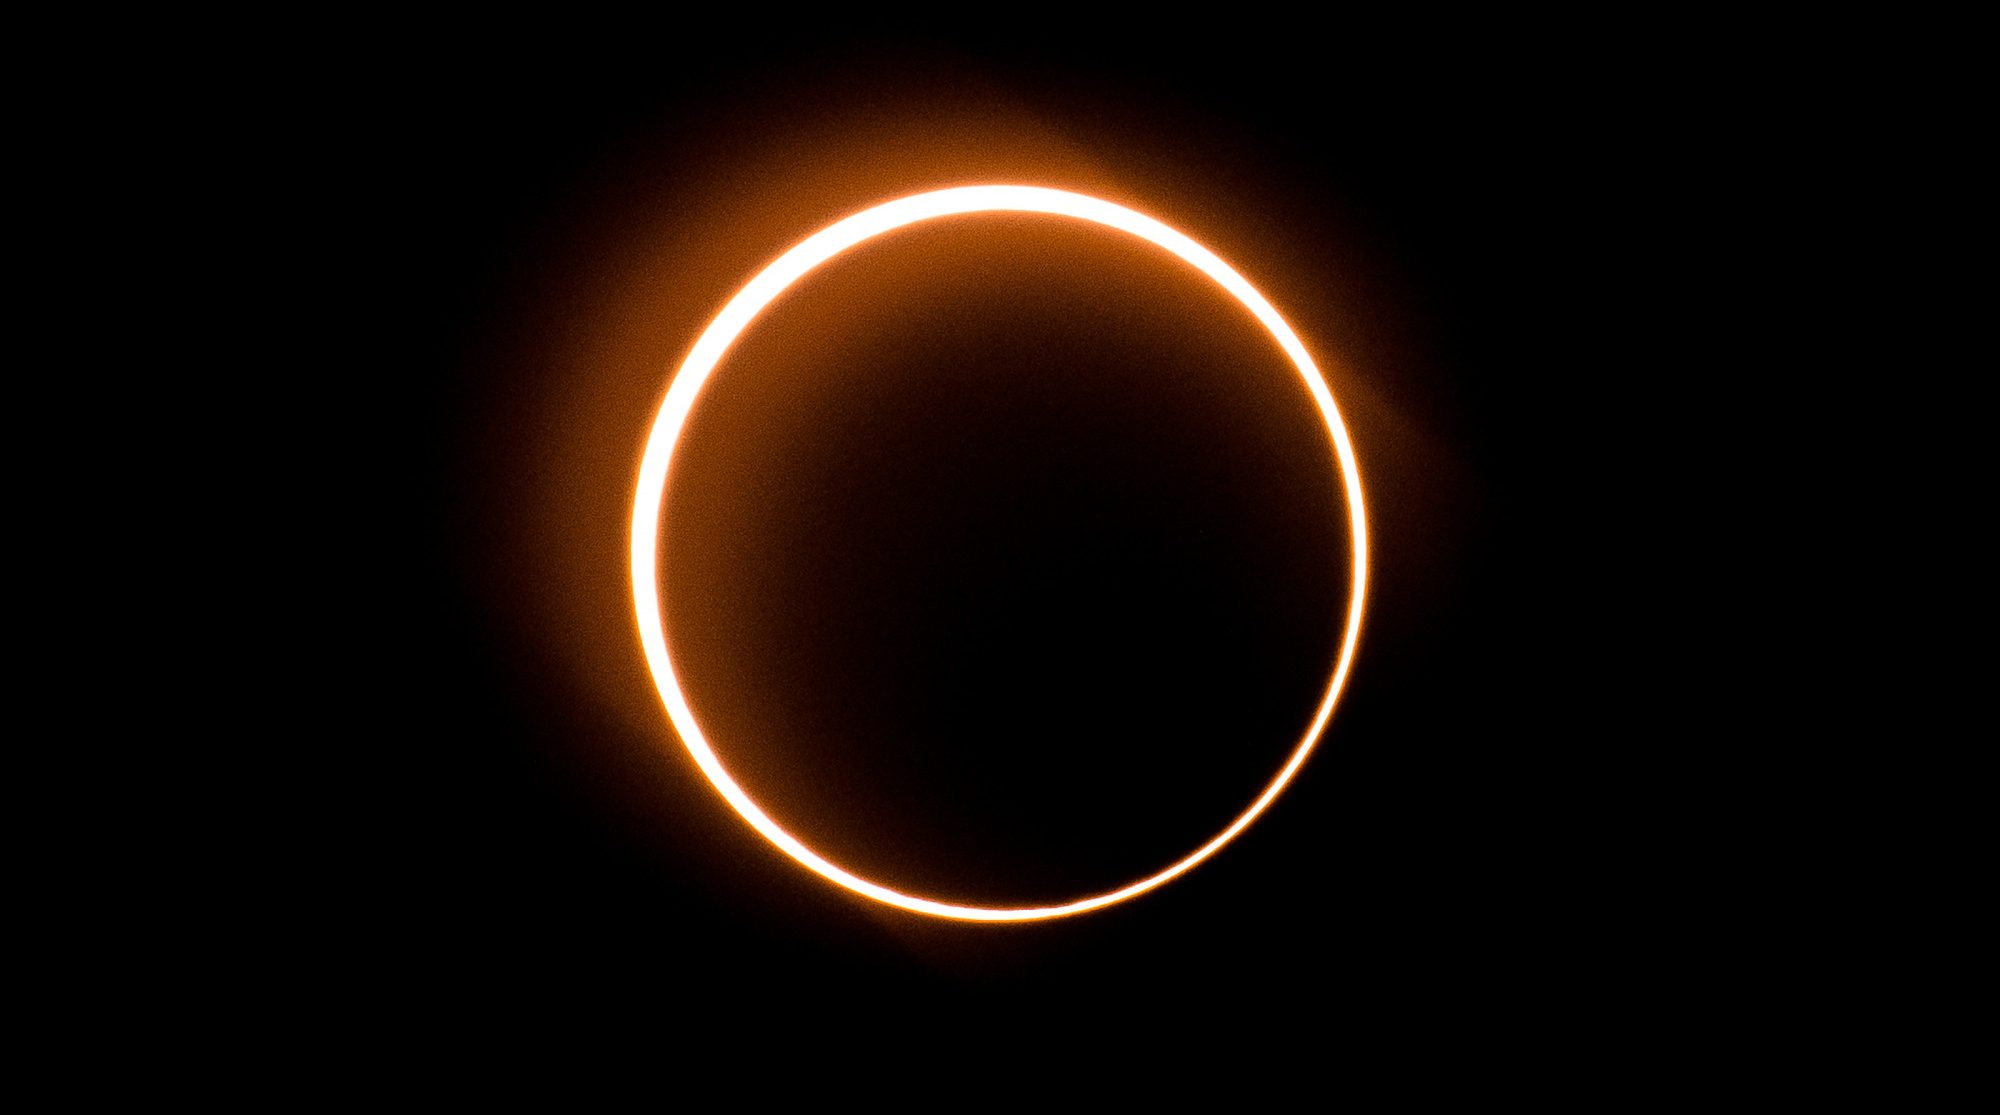 Solar Eclipse 2020: When and Where to See the Annular Eclipse